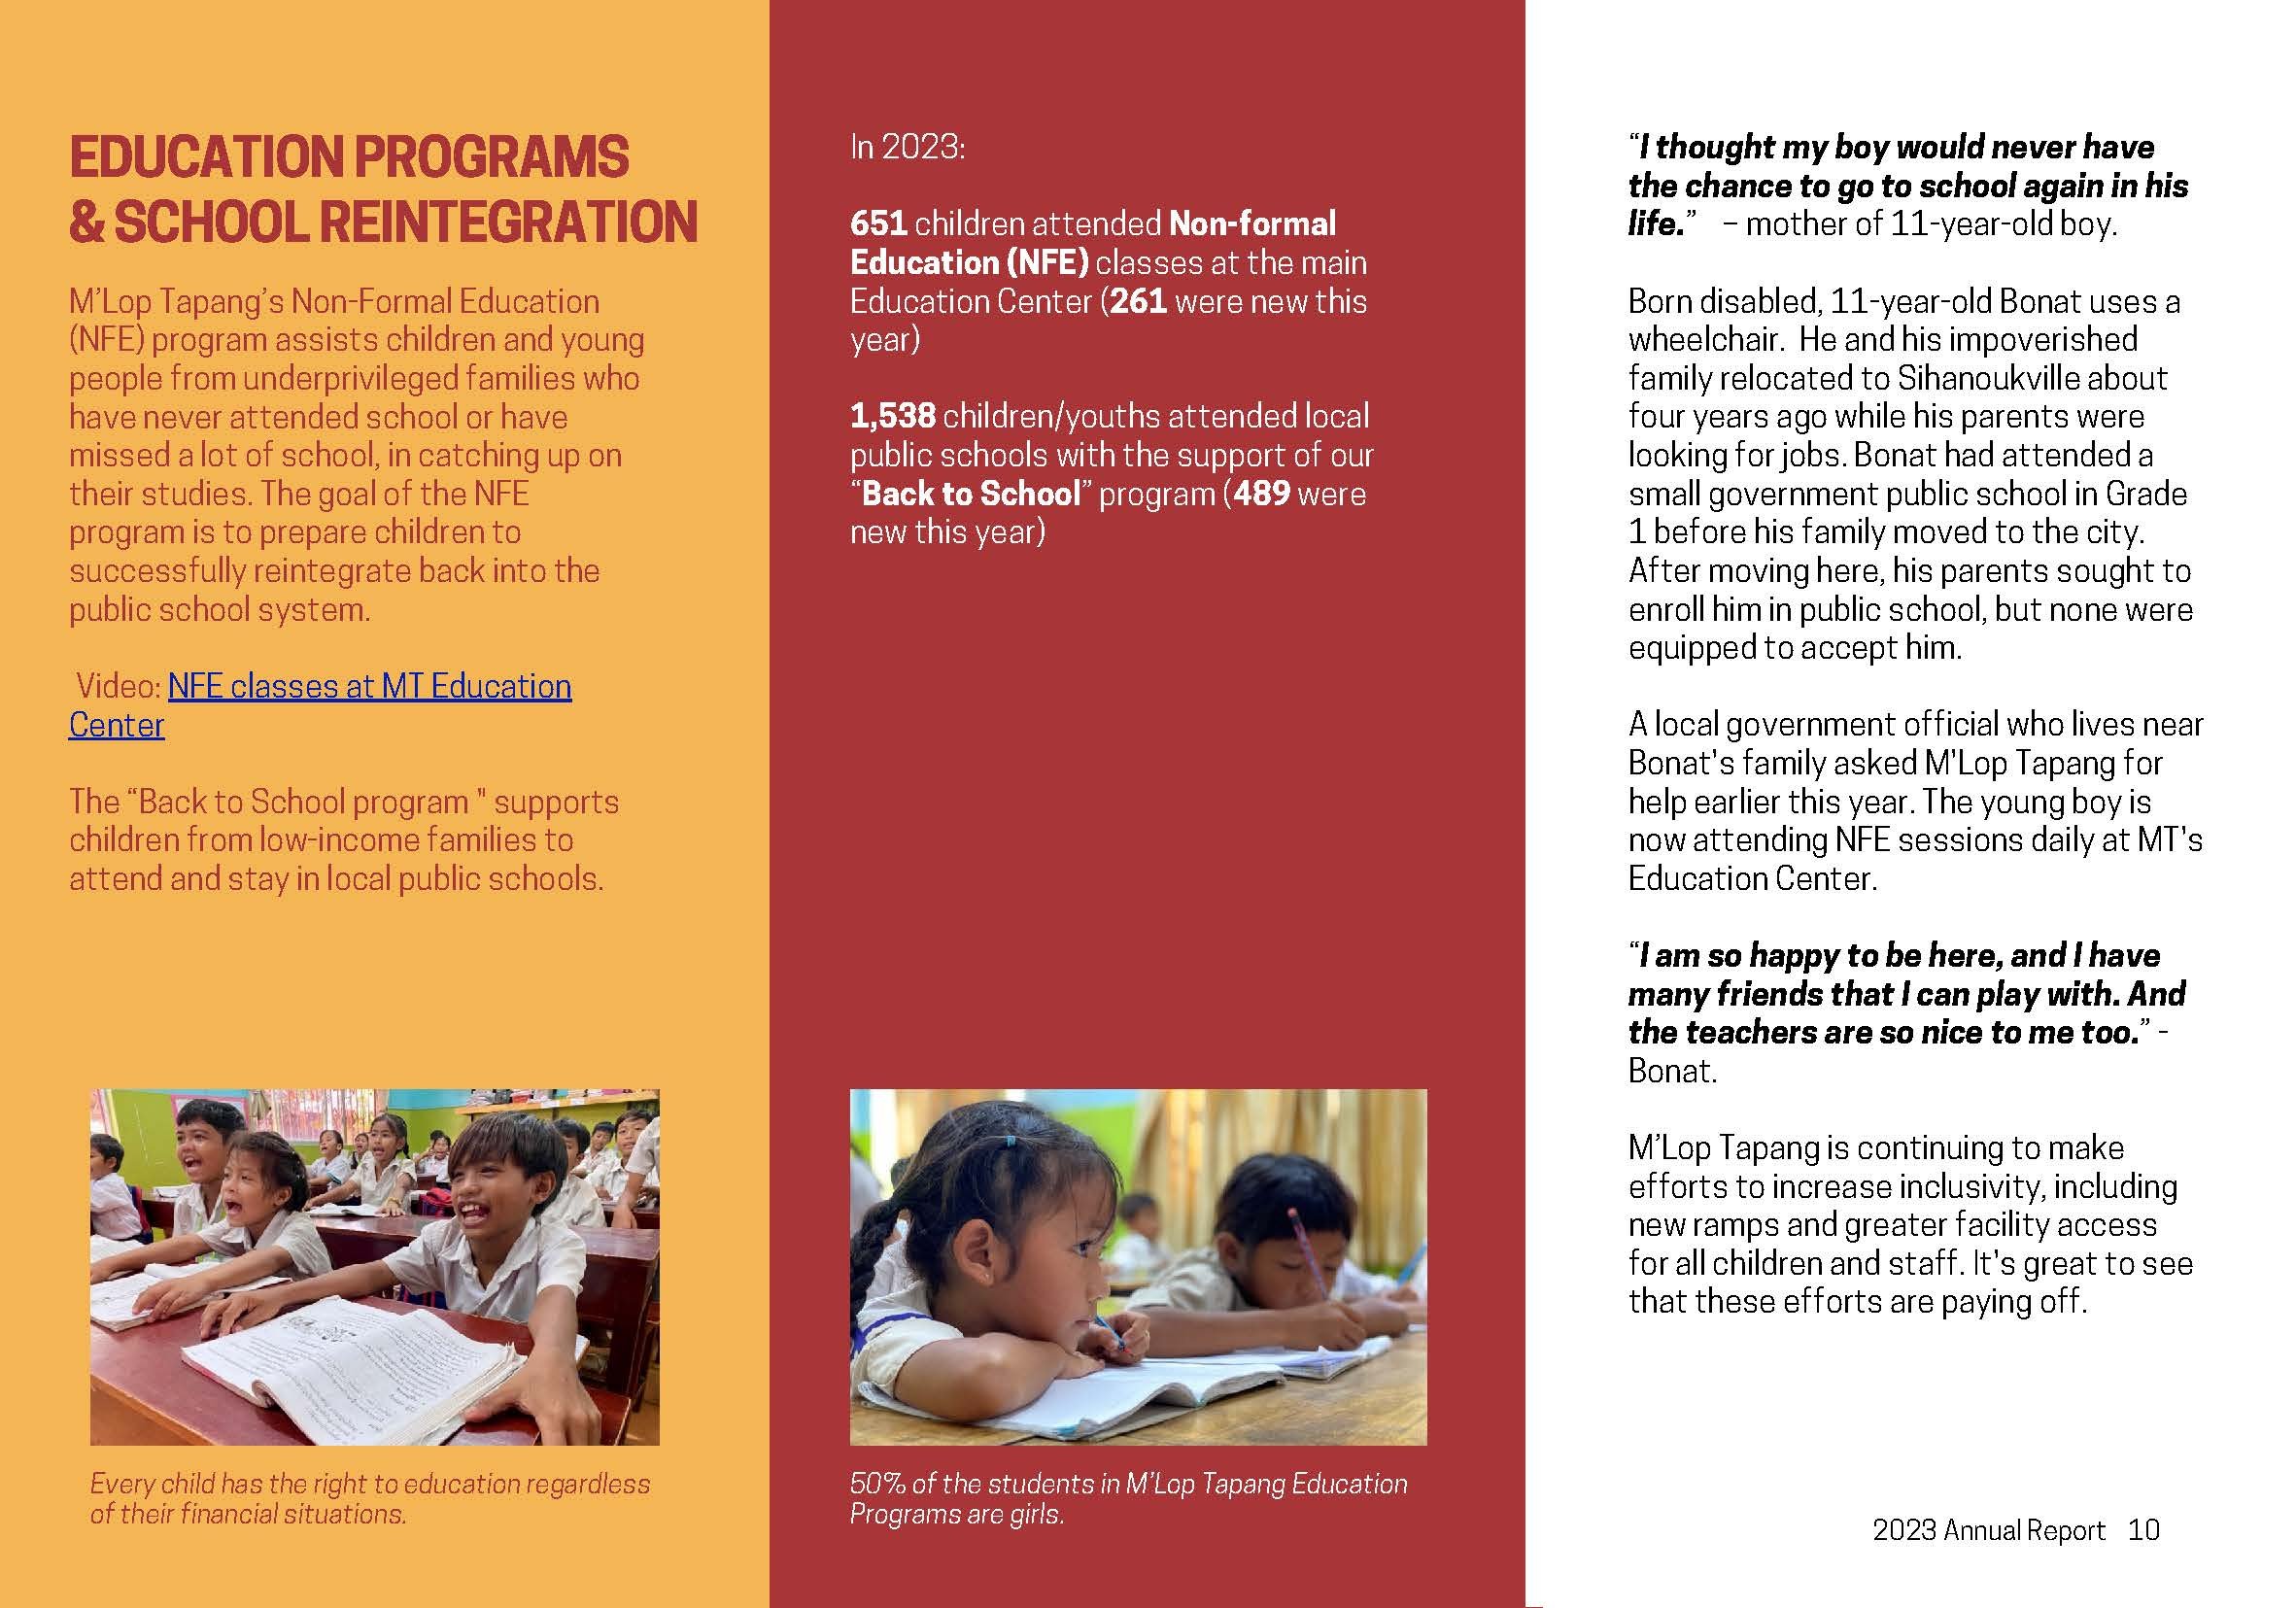 M'Lop Tapang 2023 Annual Report_Page_11.jpg